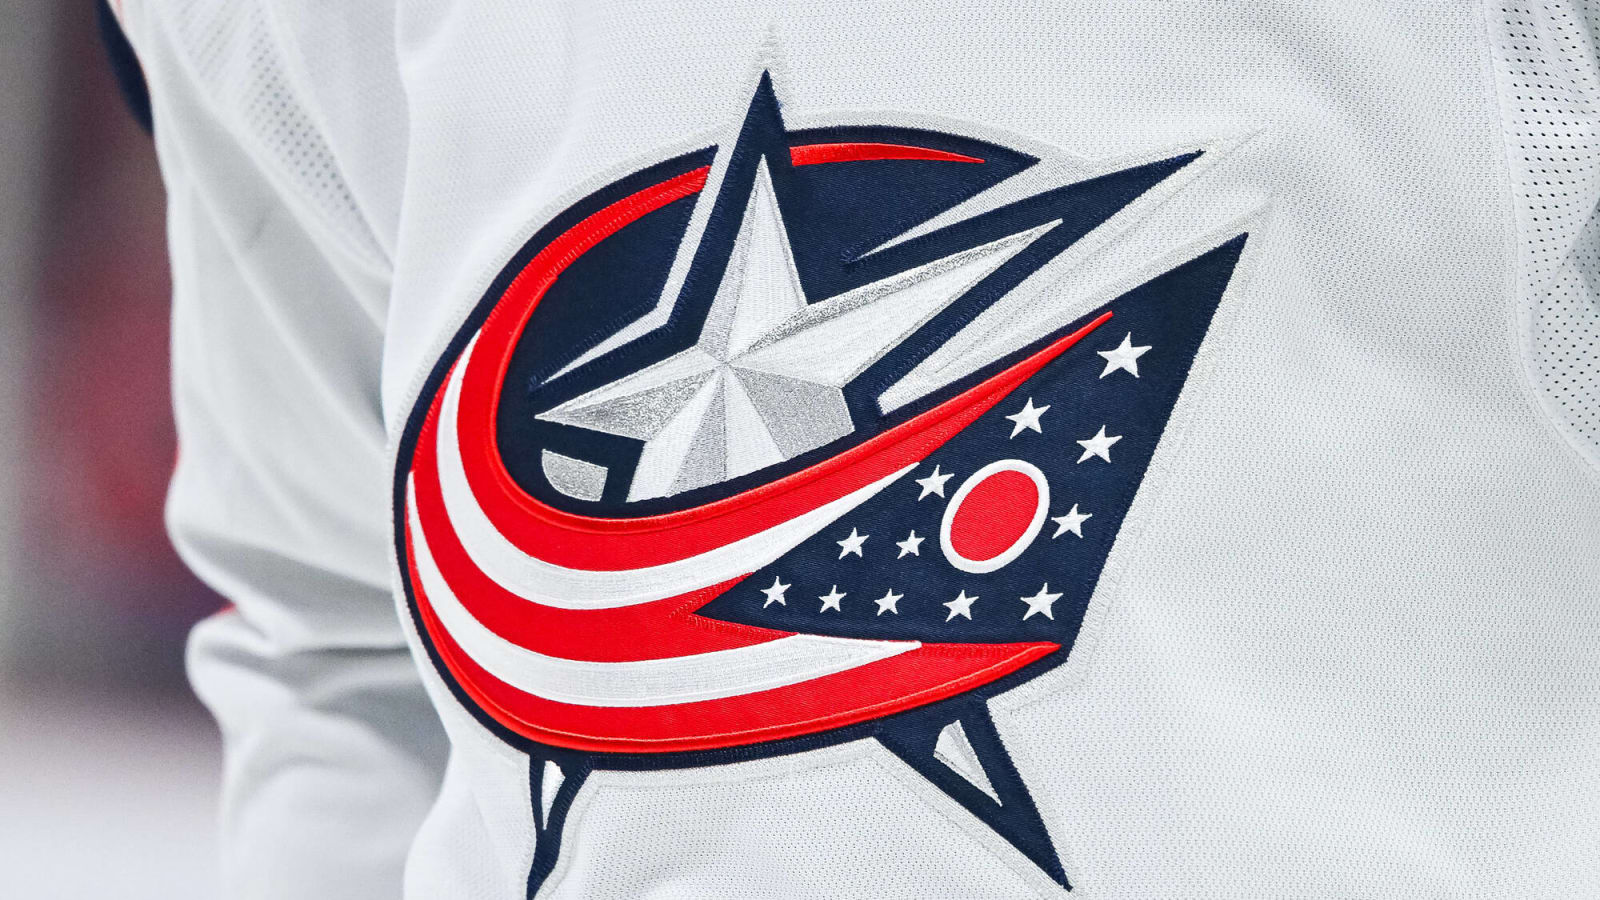 Blue Jackets Wise to Take Slow Approach on GM Hire